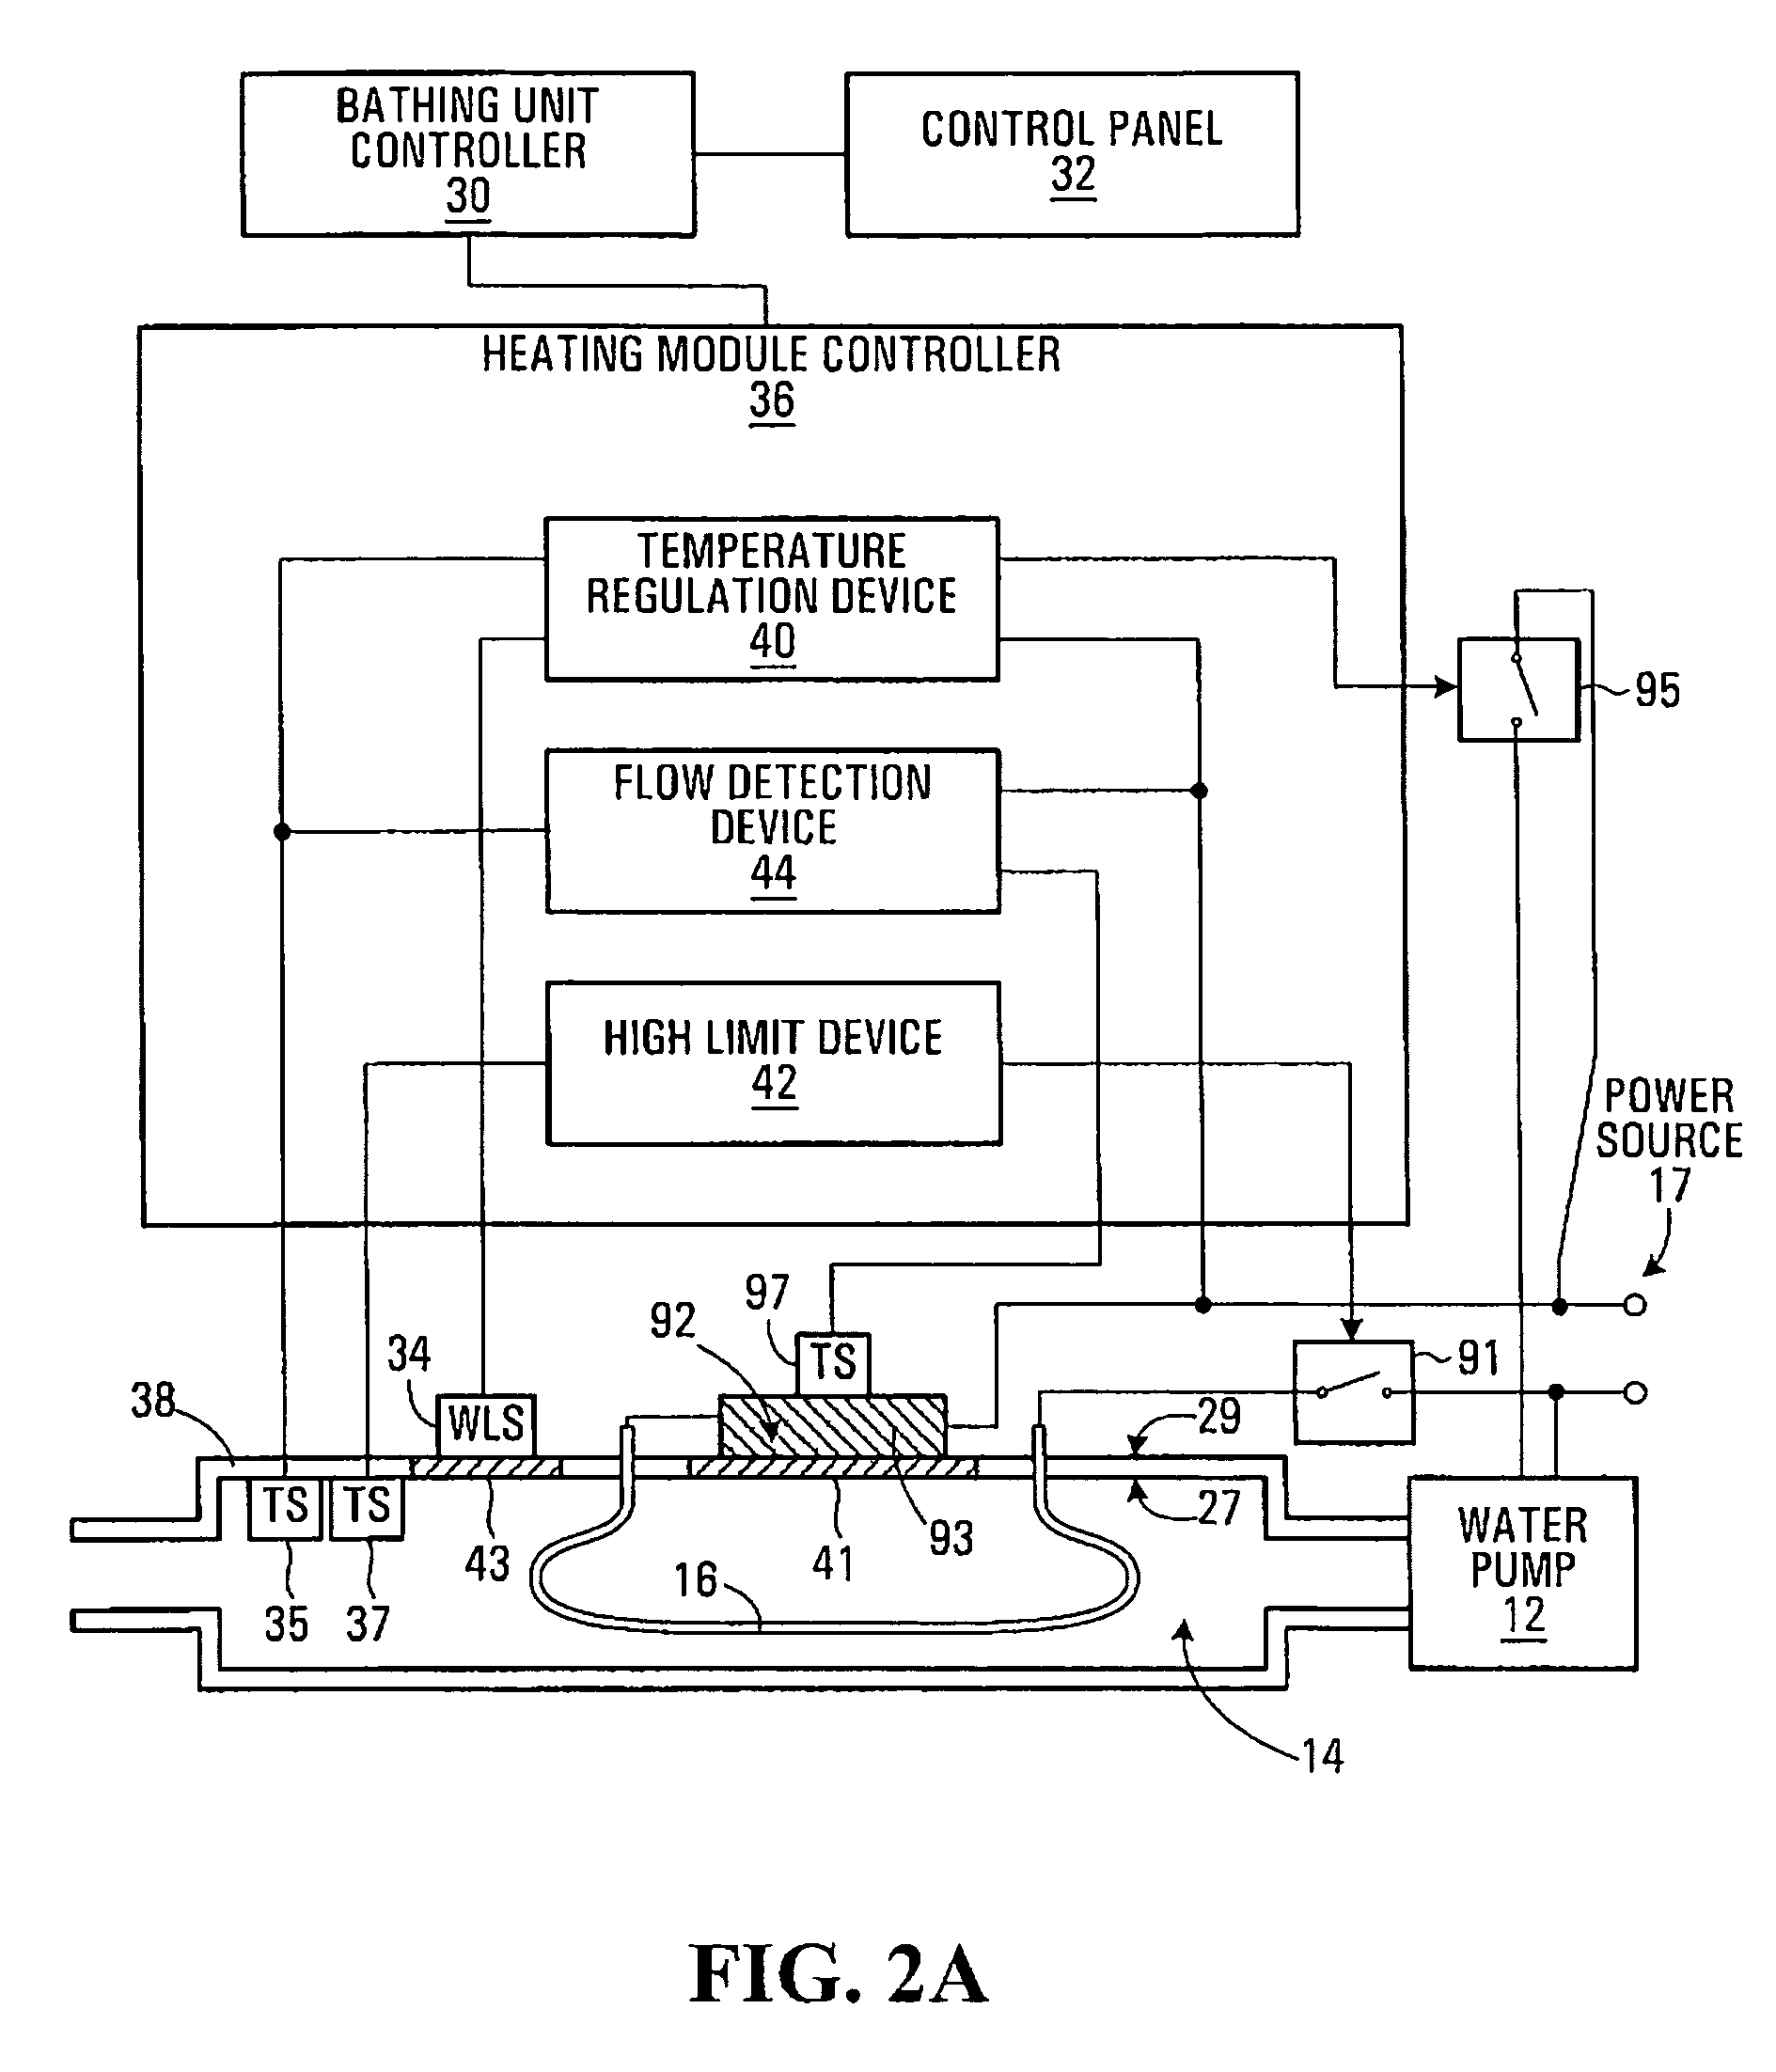 Water flow detection system for a bathing unit